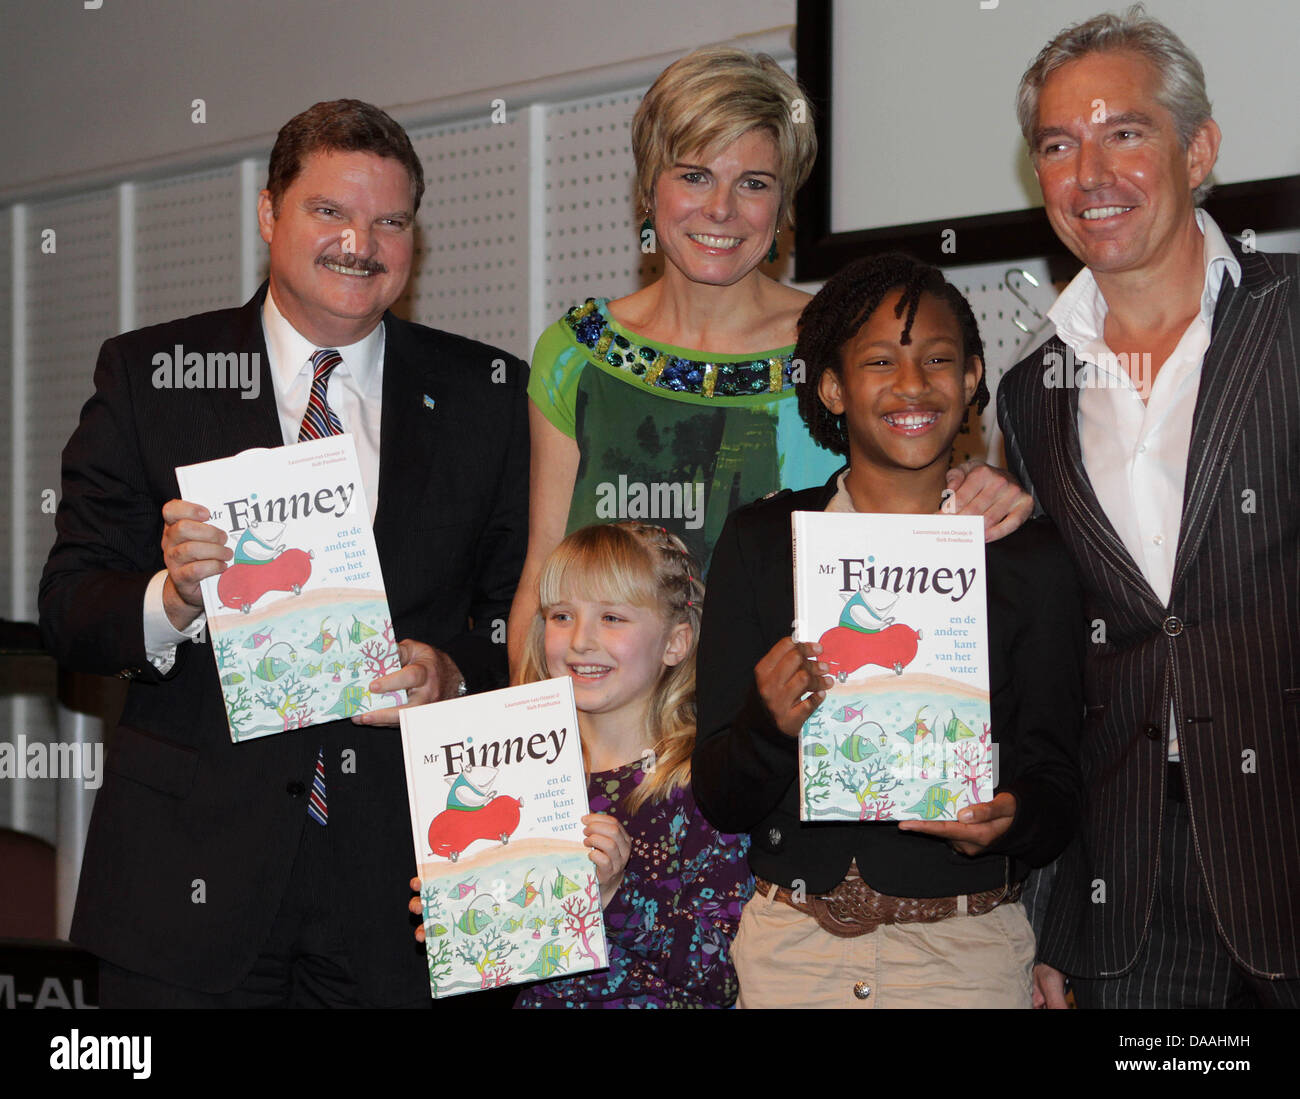 (L-R) The Prime Minister of Aruba, Mike Eman, Dutch Princess Laurentien, the illustrator Sieb Posthuma and two children present Laurentien's new book 'Mr. Finney and the other side of the water' in Rotterdam, The Netherlands, 02 February 2011. It is the second book of Princess Laurentien. Photo: Albert Philip van der Werf Stock Photo